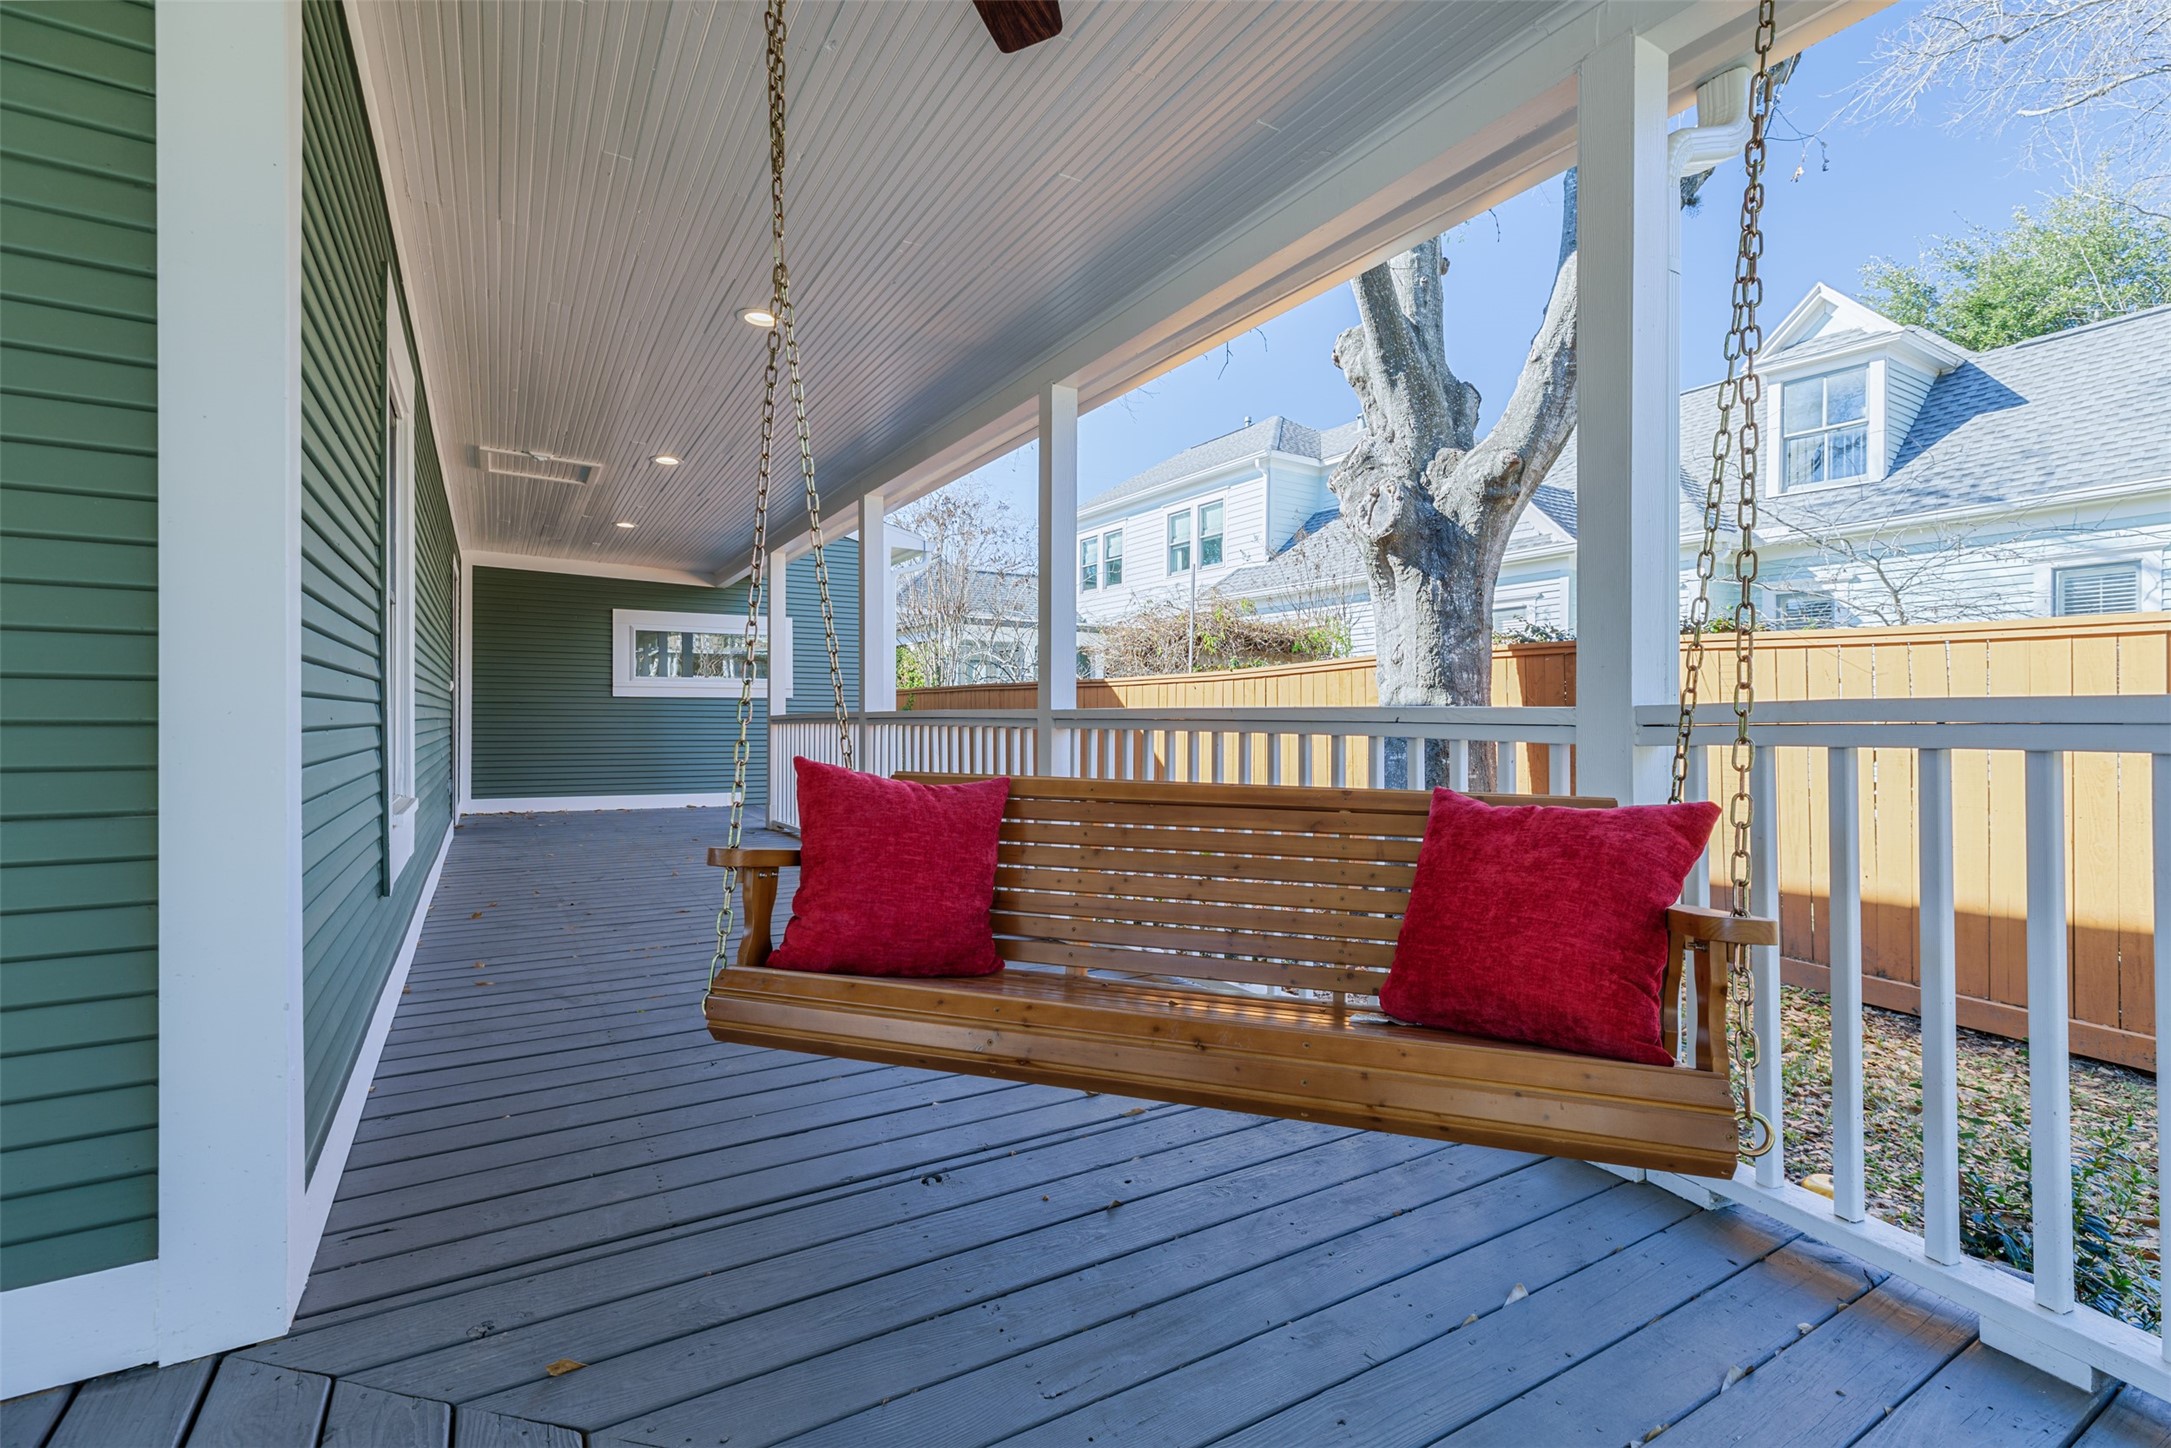 Relax under the fan to enjoy the full aspect of the period wrap around front porch.